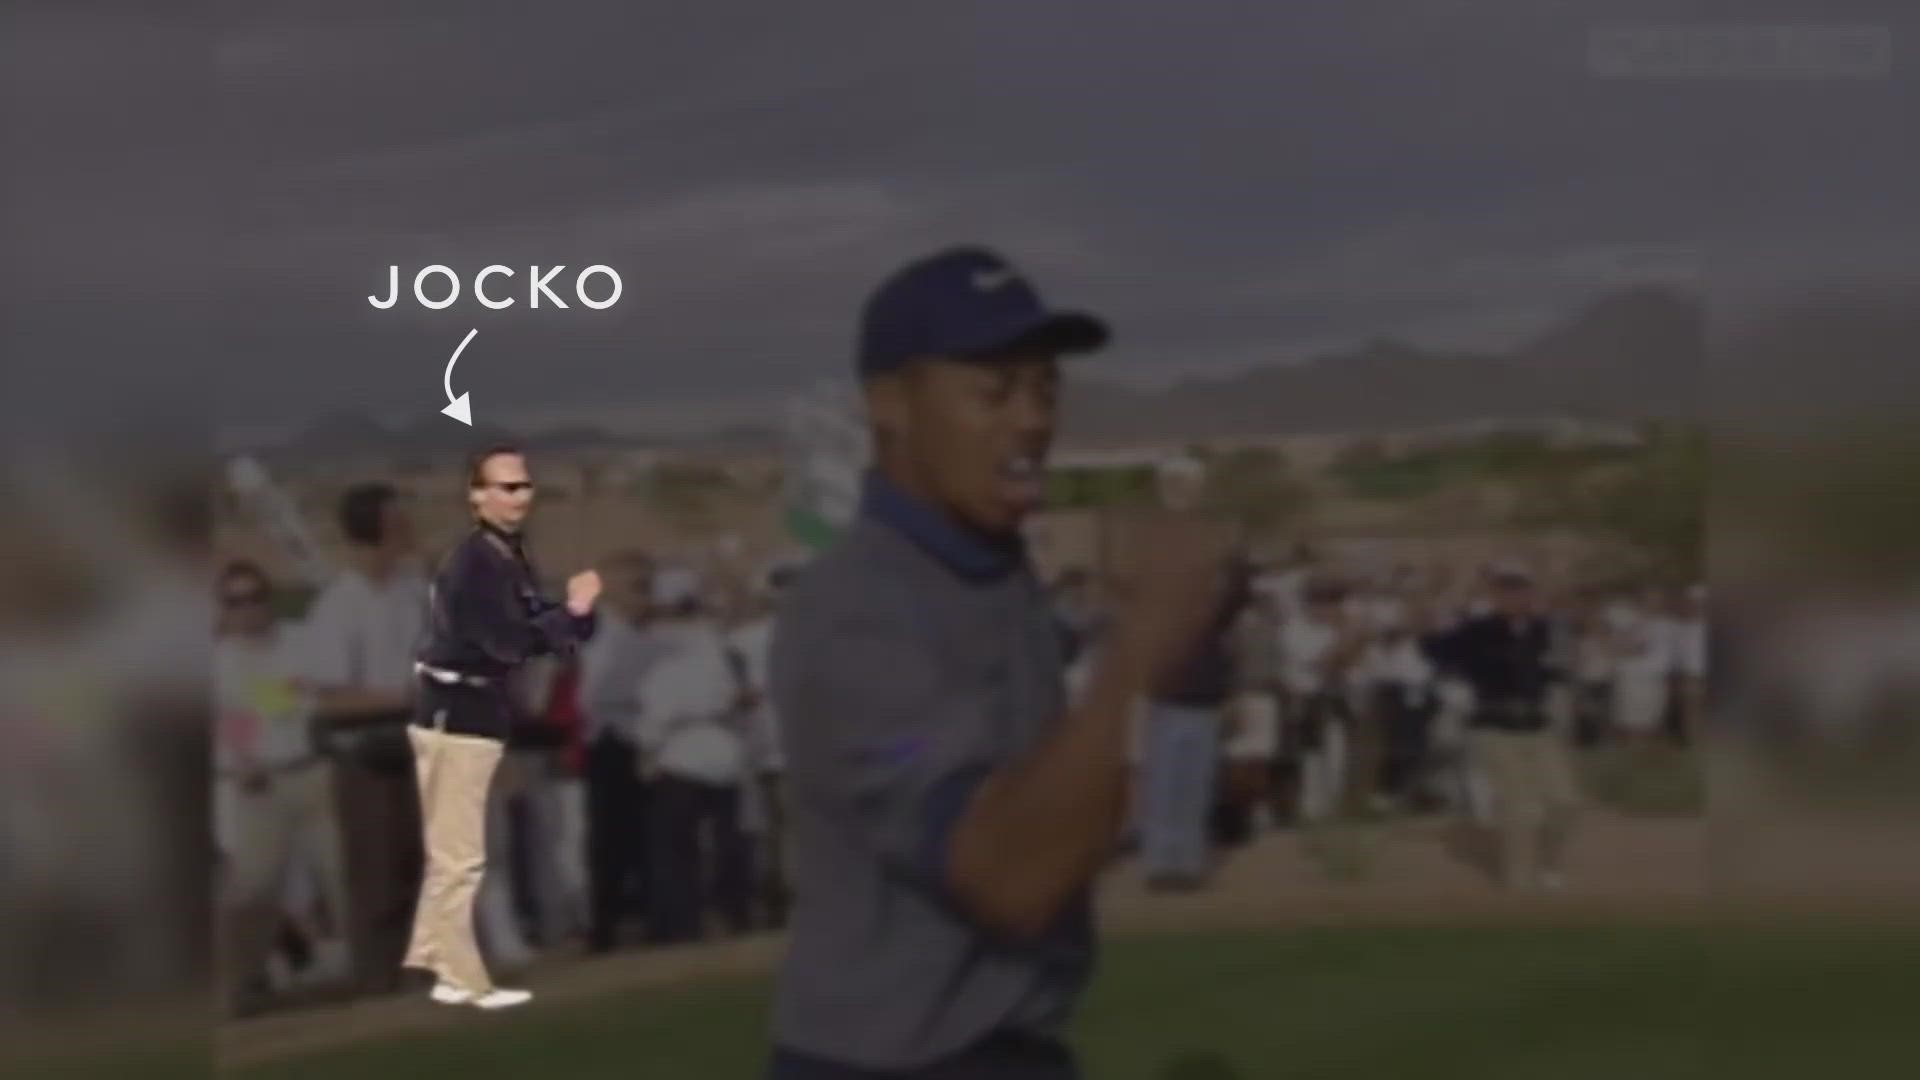 Jocko's first day on the job was during Tiger Woods' 1997 famous ace.